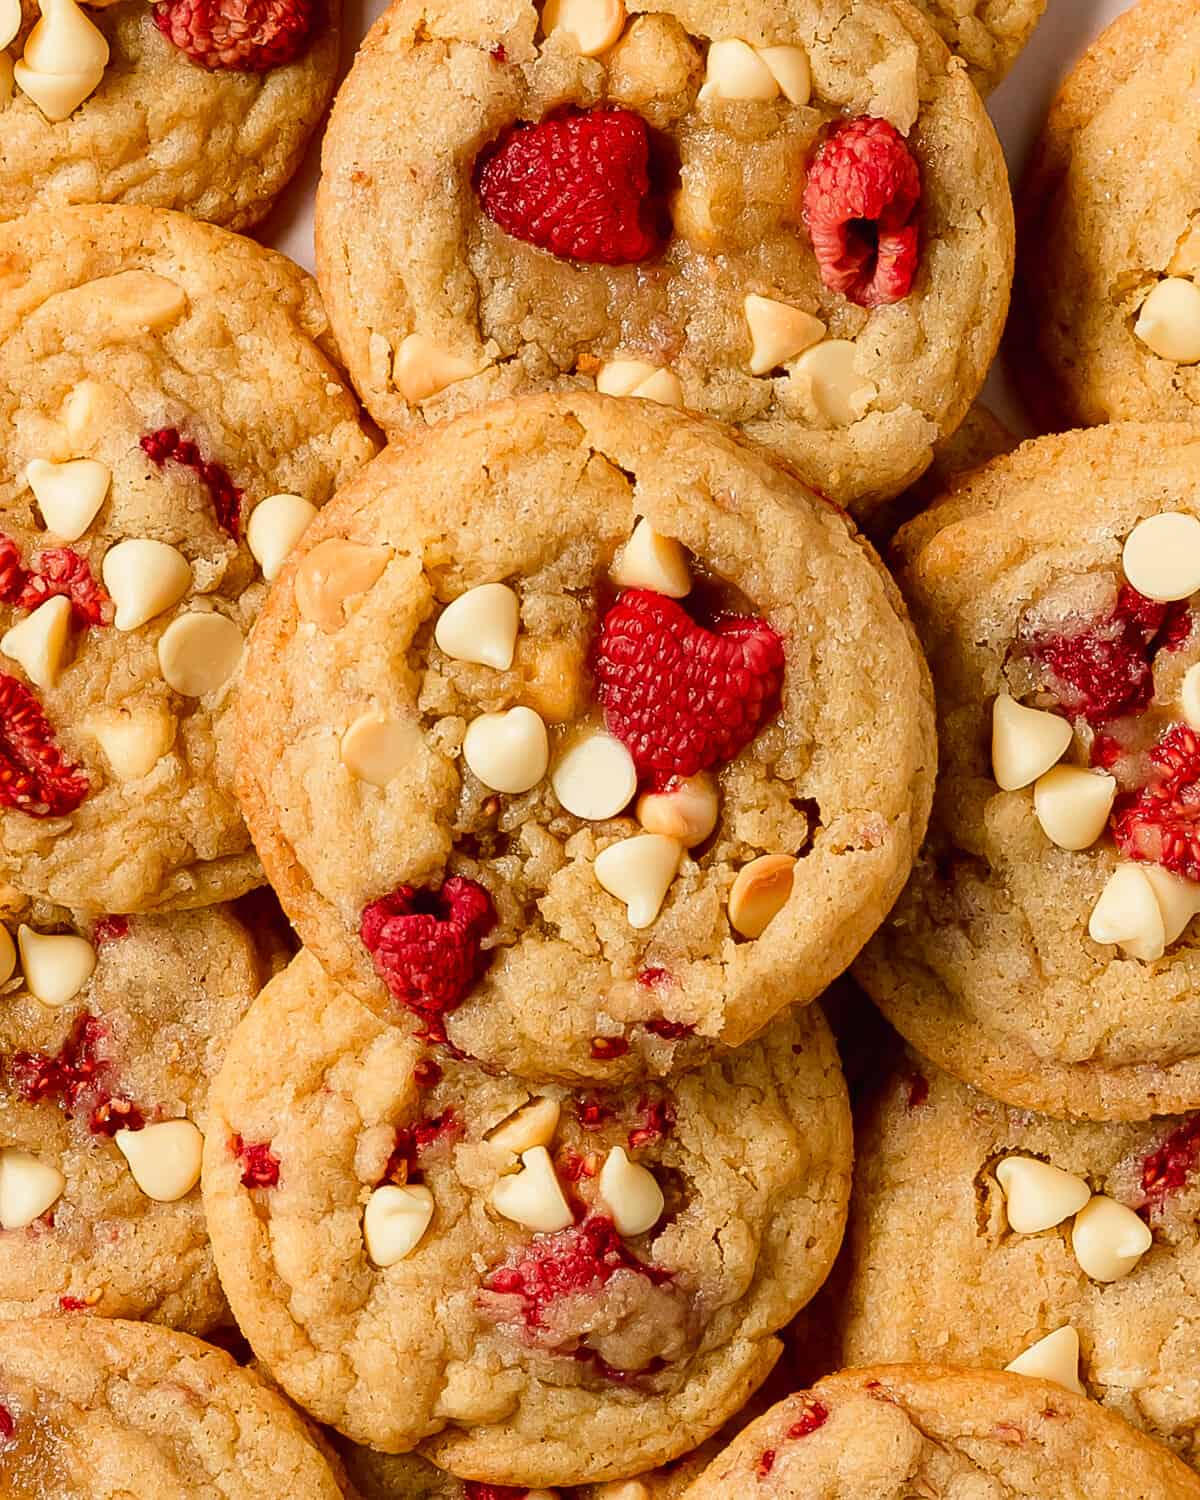 White chocolate raspberry cookies are soft, chewy and buttery sugar cookies filled with tart, juicy raspberries and creamy white chocolate. This raspberry white chocolate cookie recipe is no chill, quick and easy to make in one bowl. 